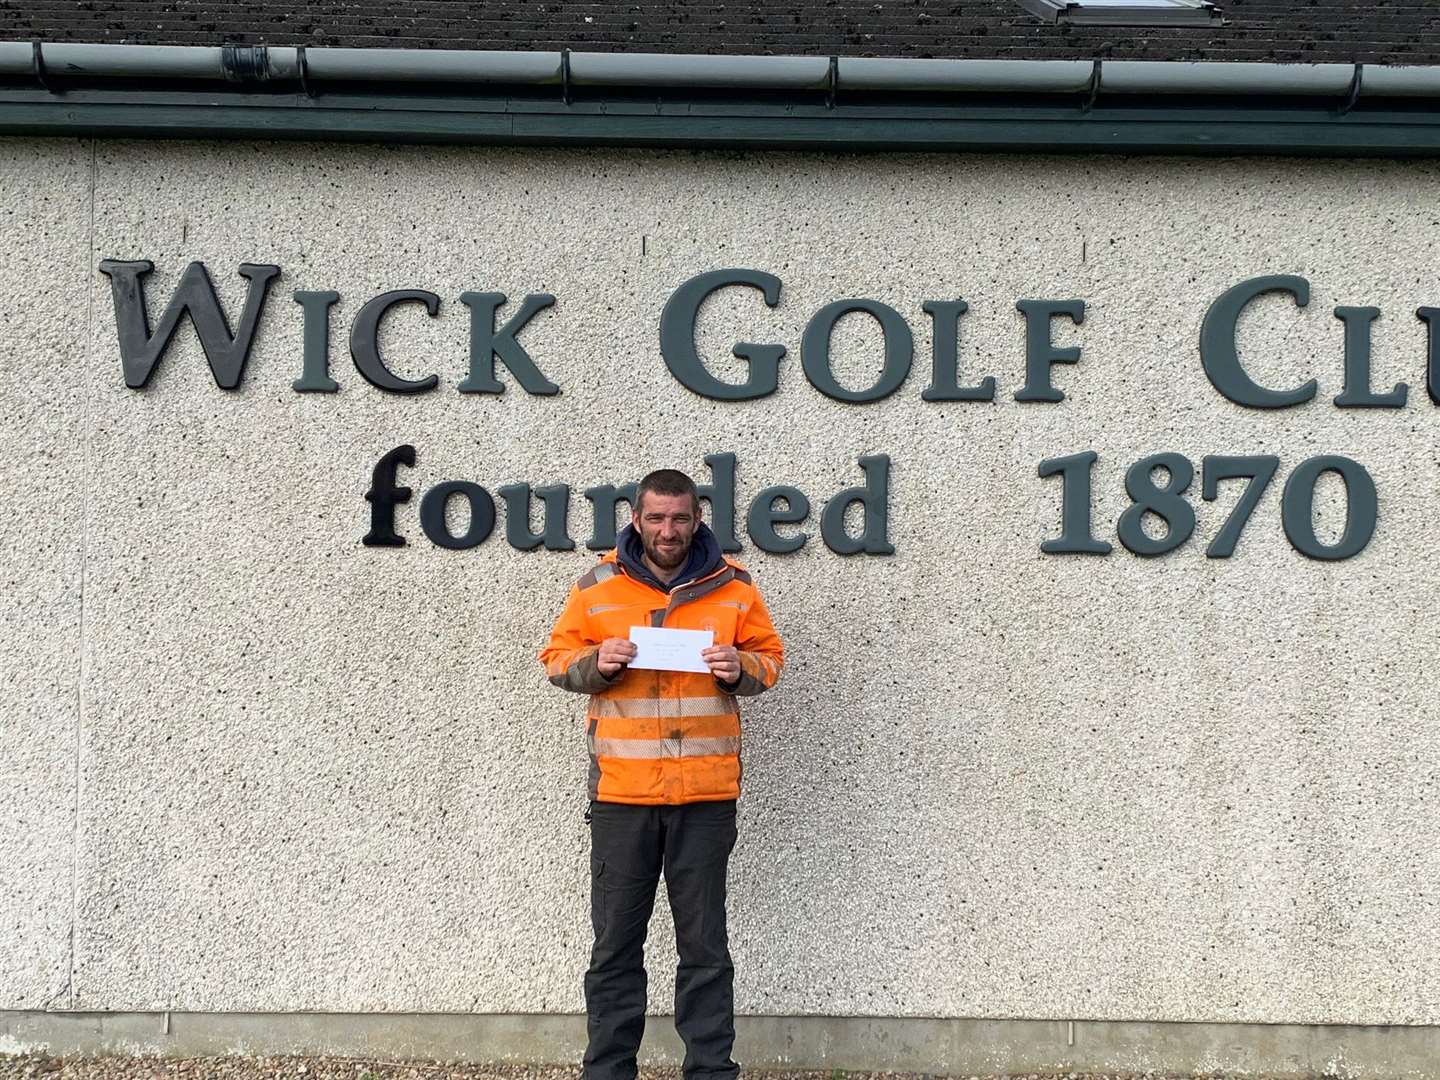 Dougie Thorburn won back to back victories on the North Golf Winter Alliance.